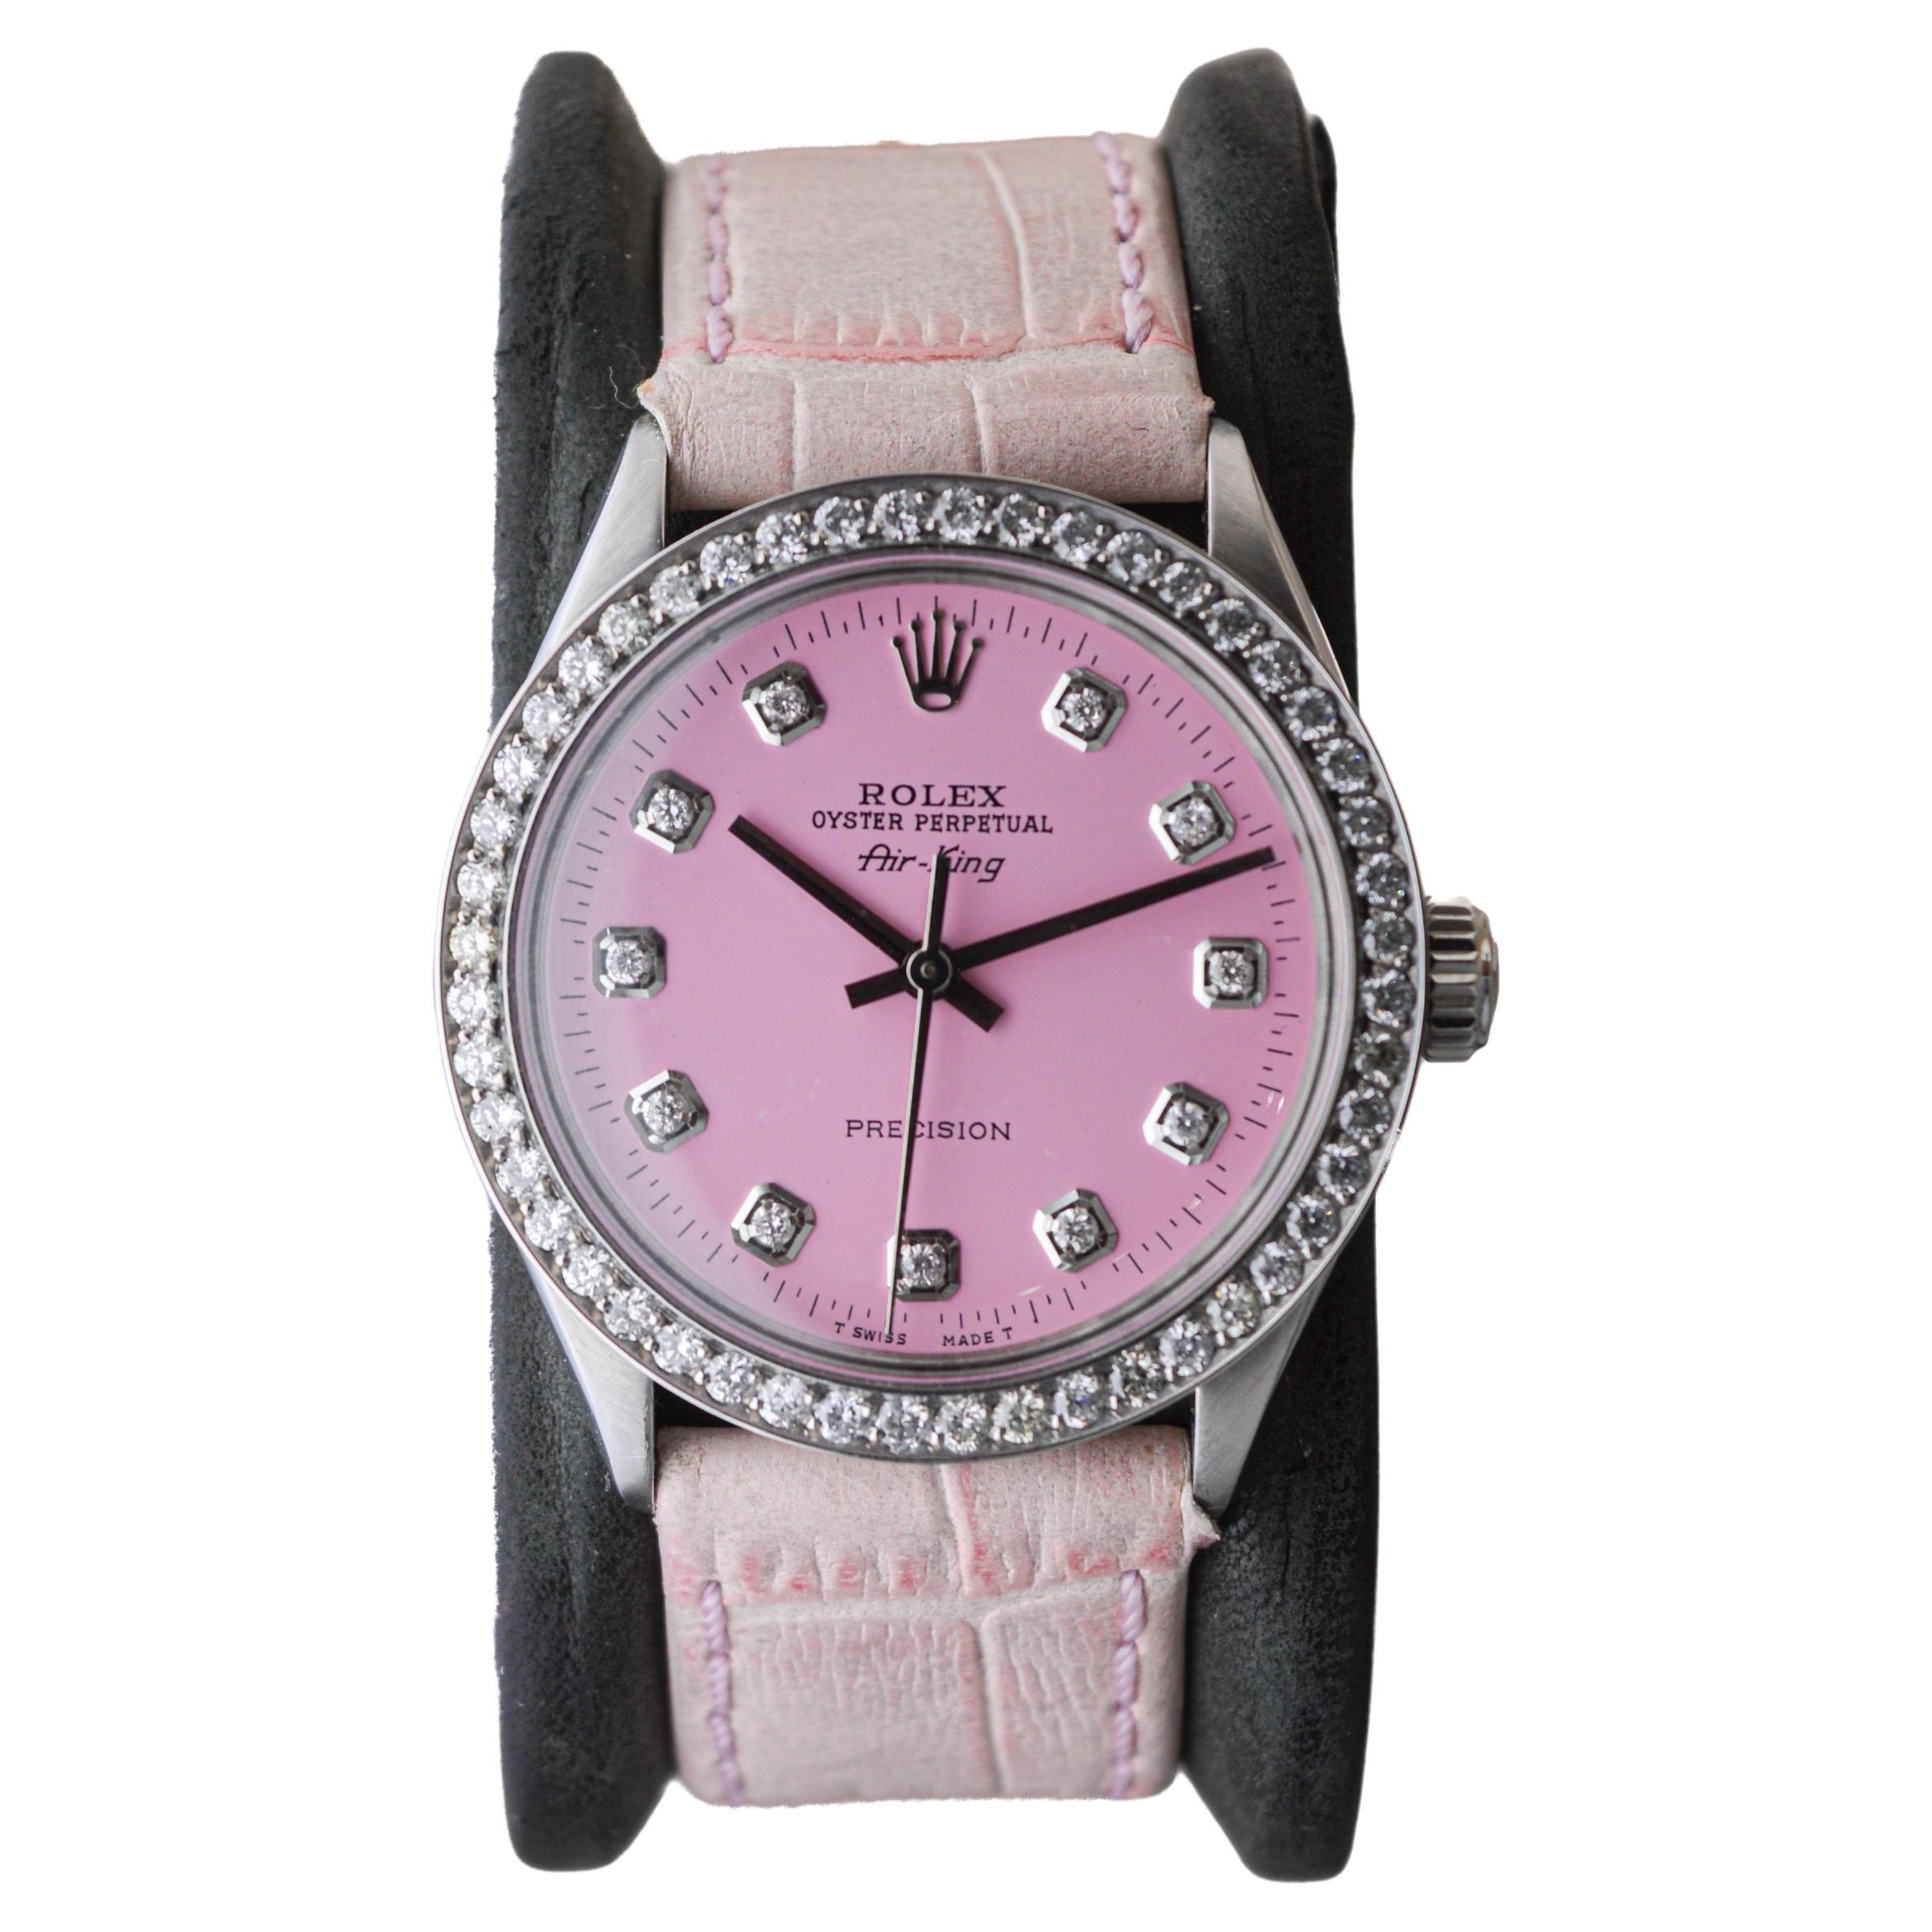 Rolex Steel Air King with Custom Made Pink Dial and Diamond Bezel circa 1970's